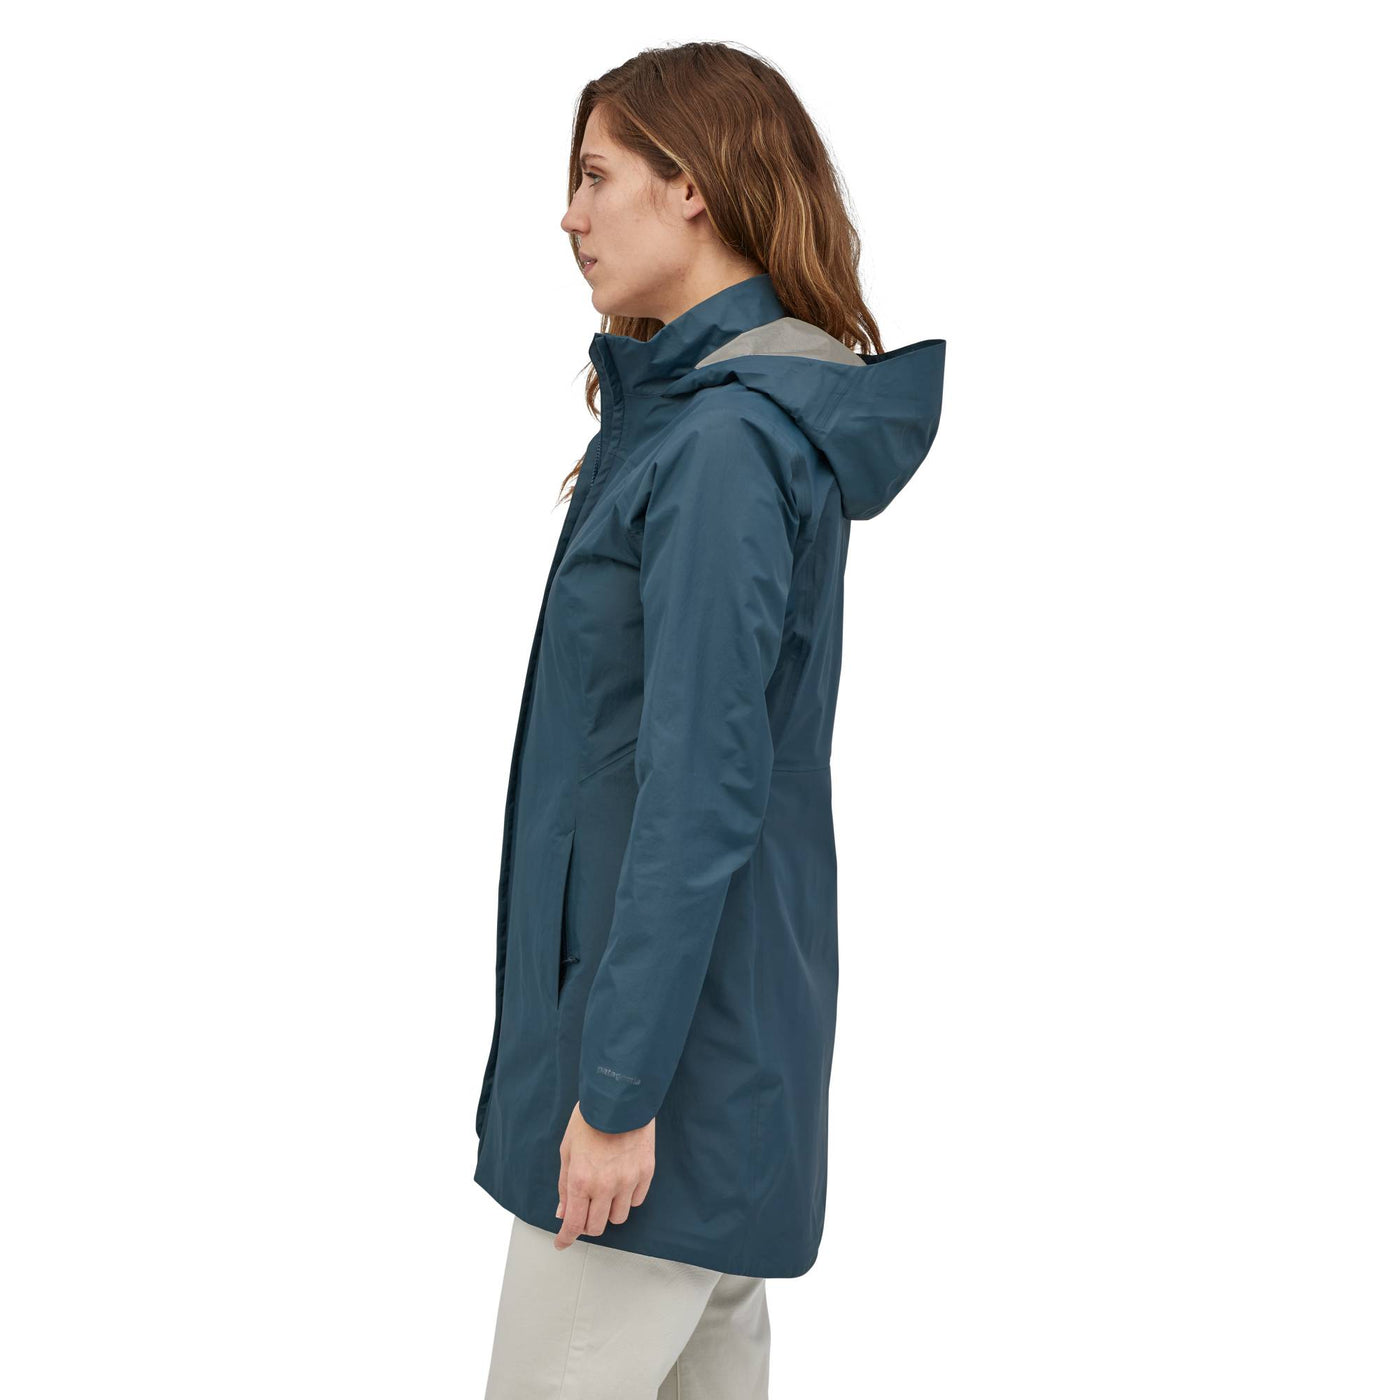 Chaqueta Impermeable Patagonia Mujer / W S Torrentshell 3L City Coat Talla Unica XS